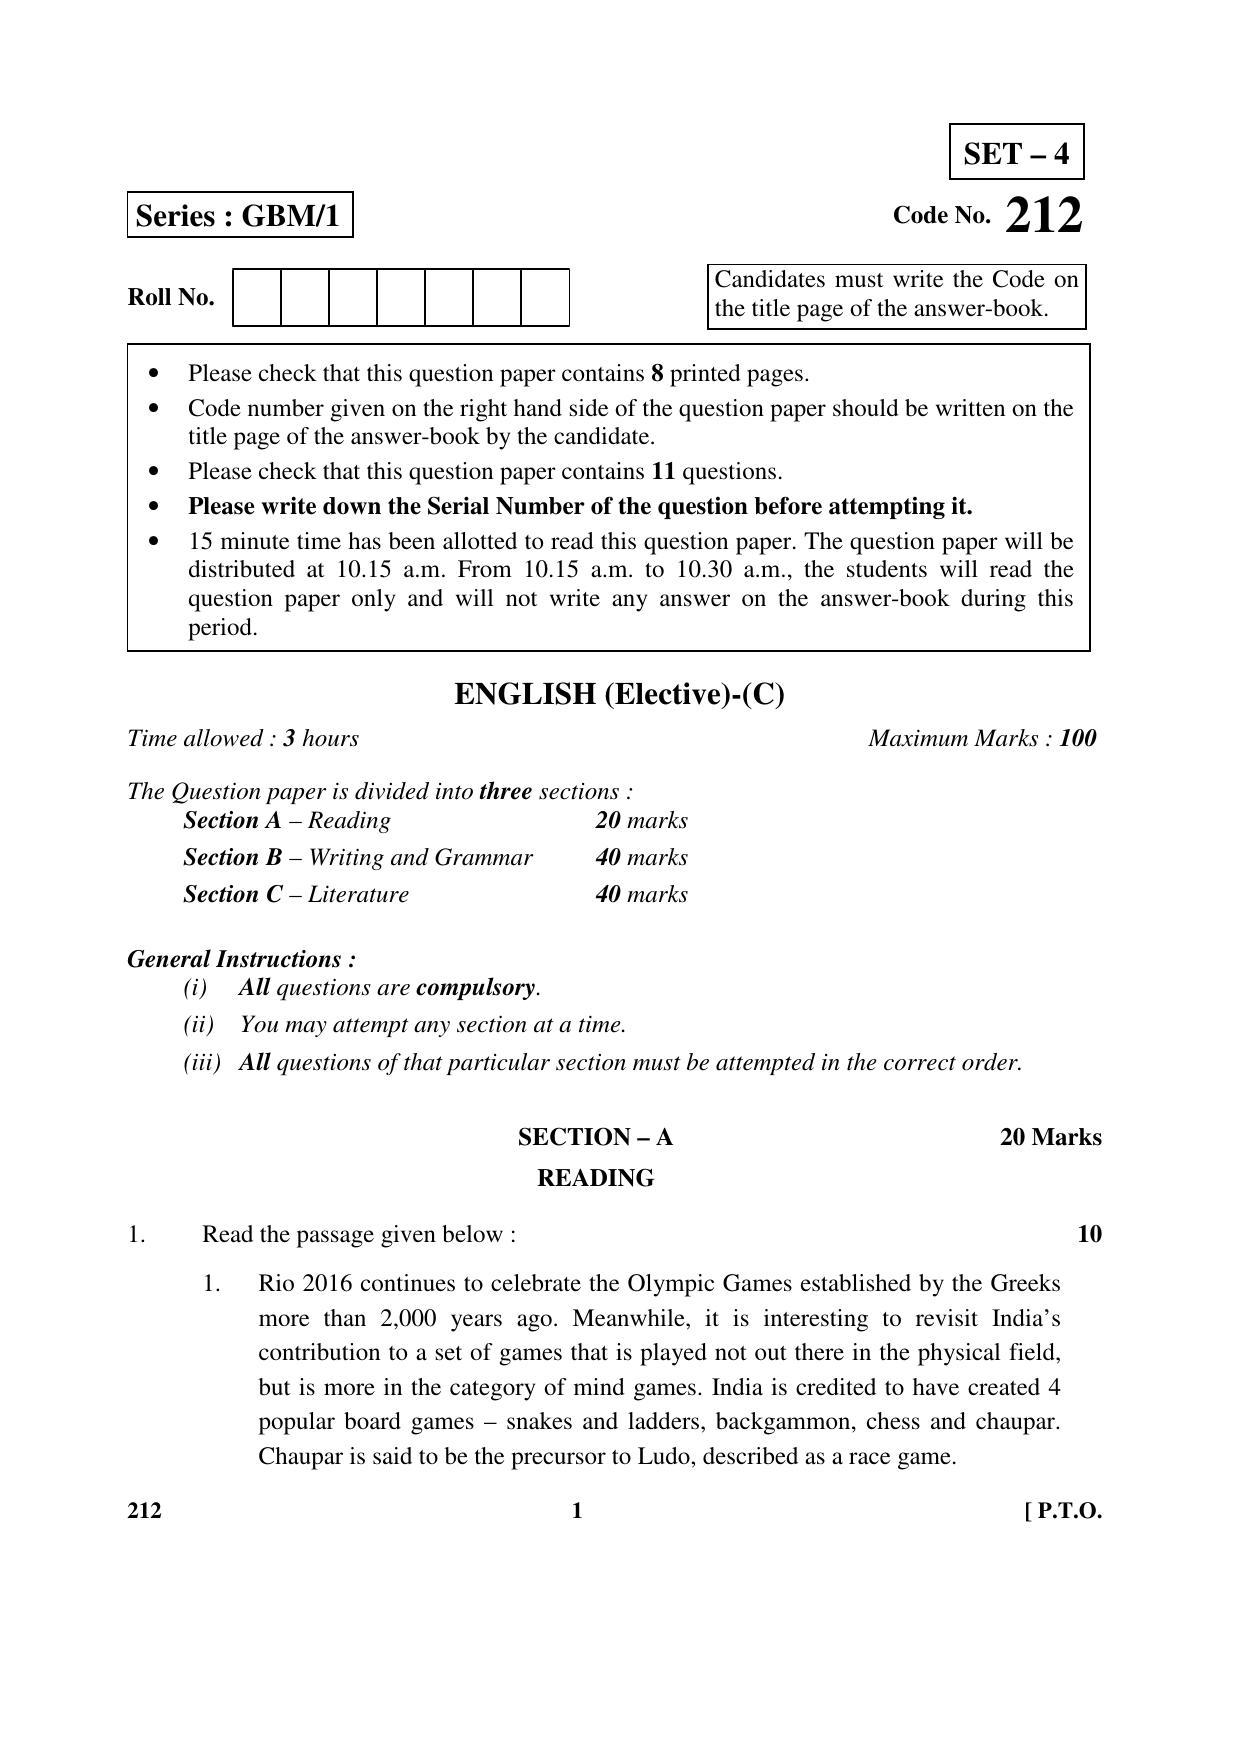 CBSE Class 12 212 _English (Elective) 2017 Question Paper - Page 1